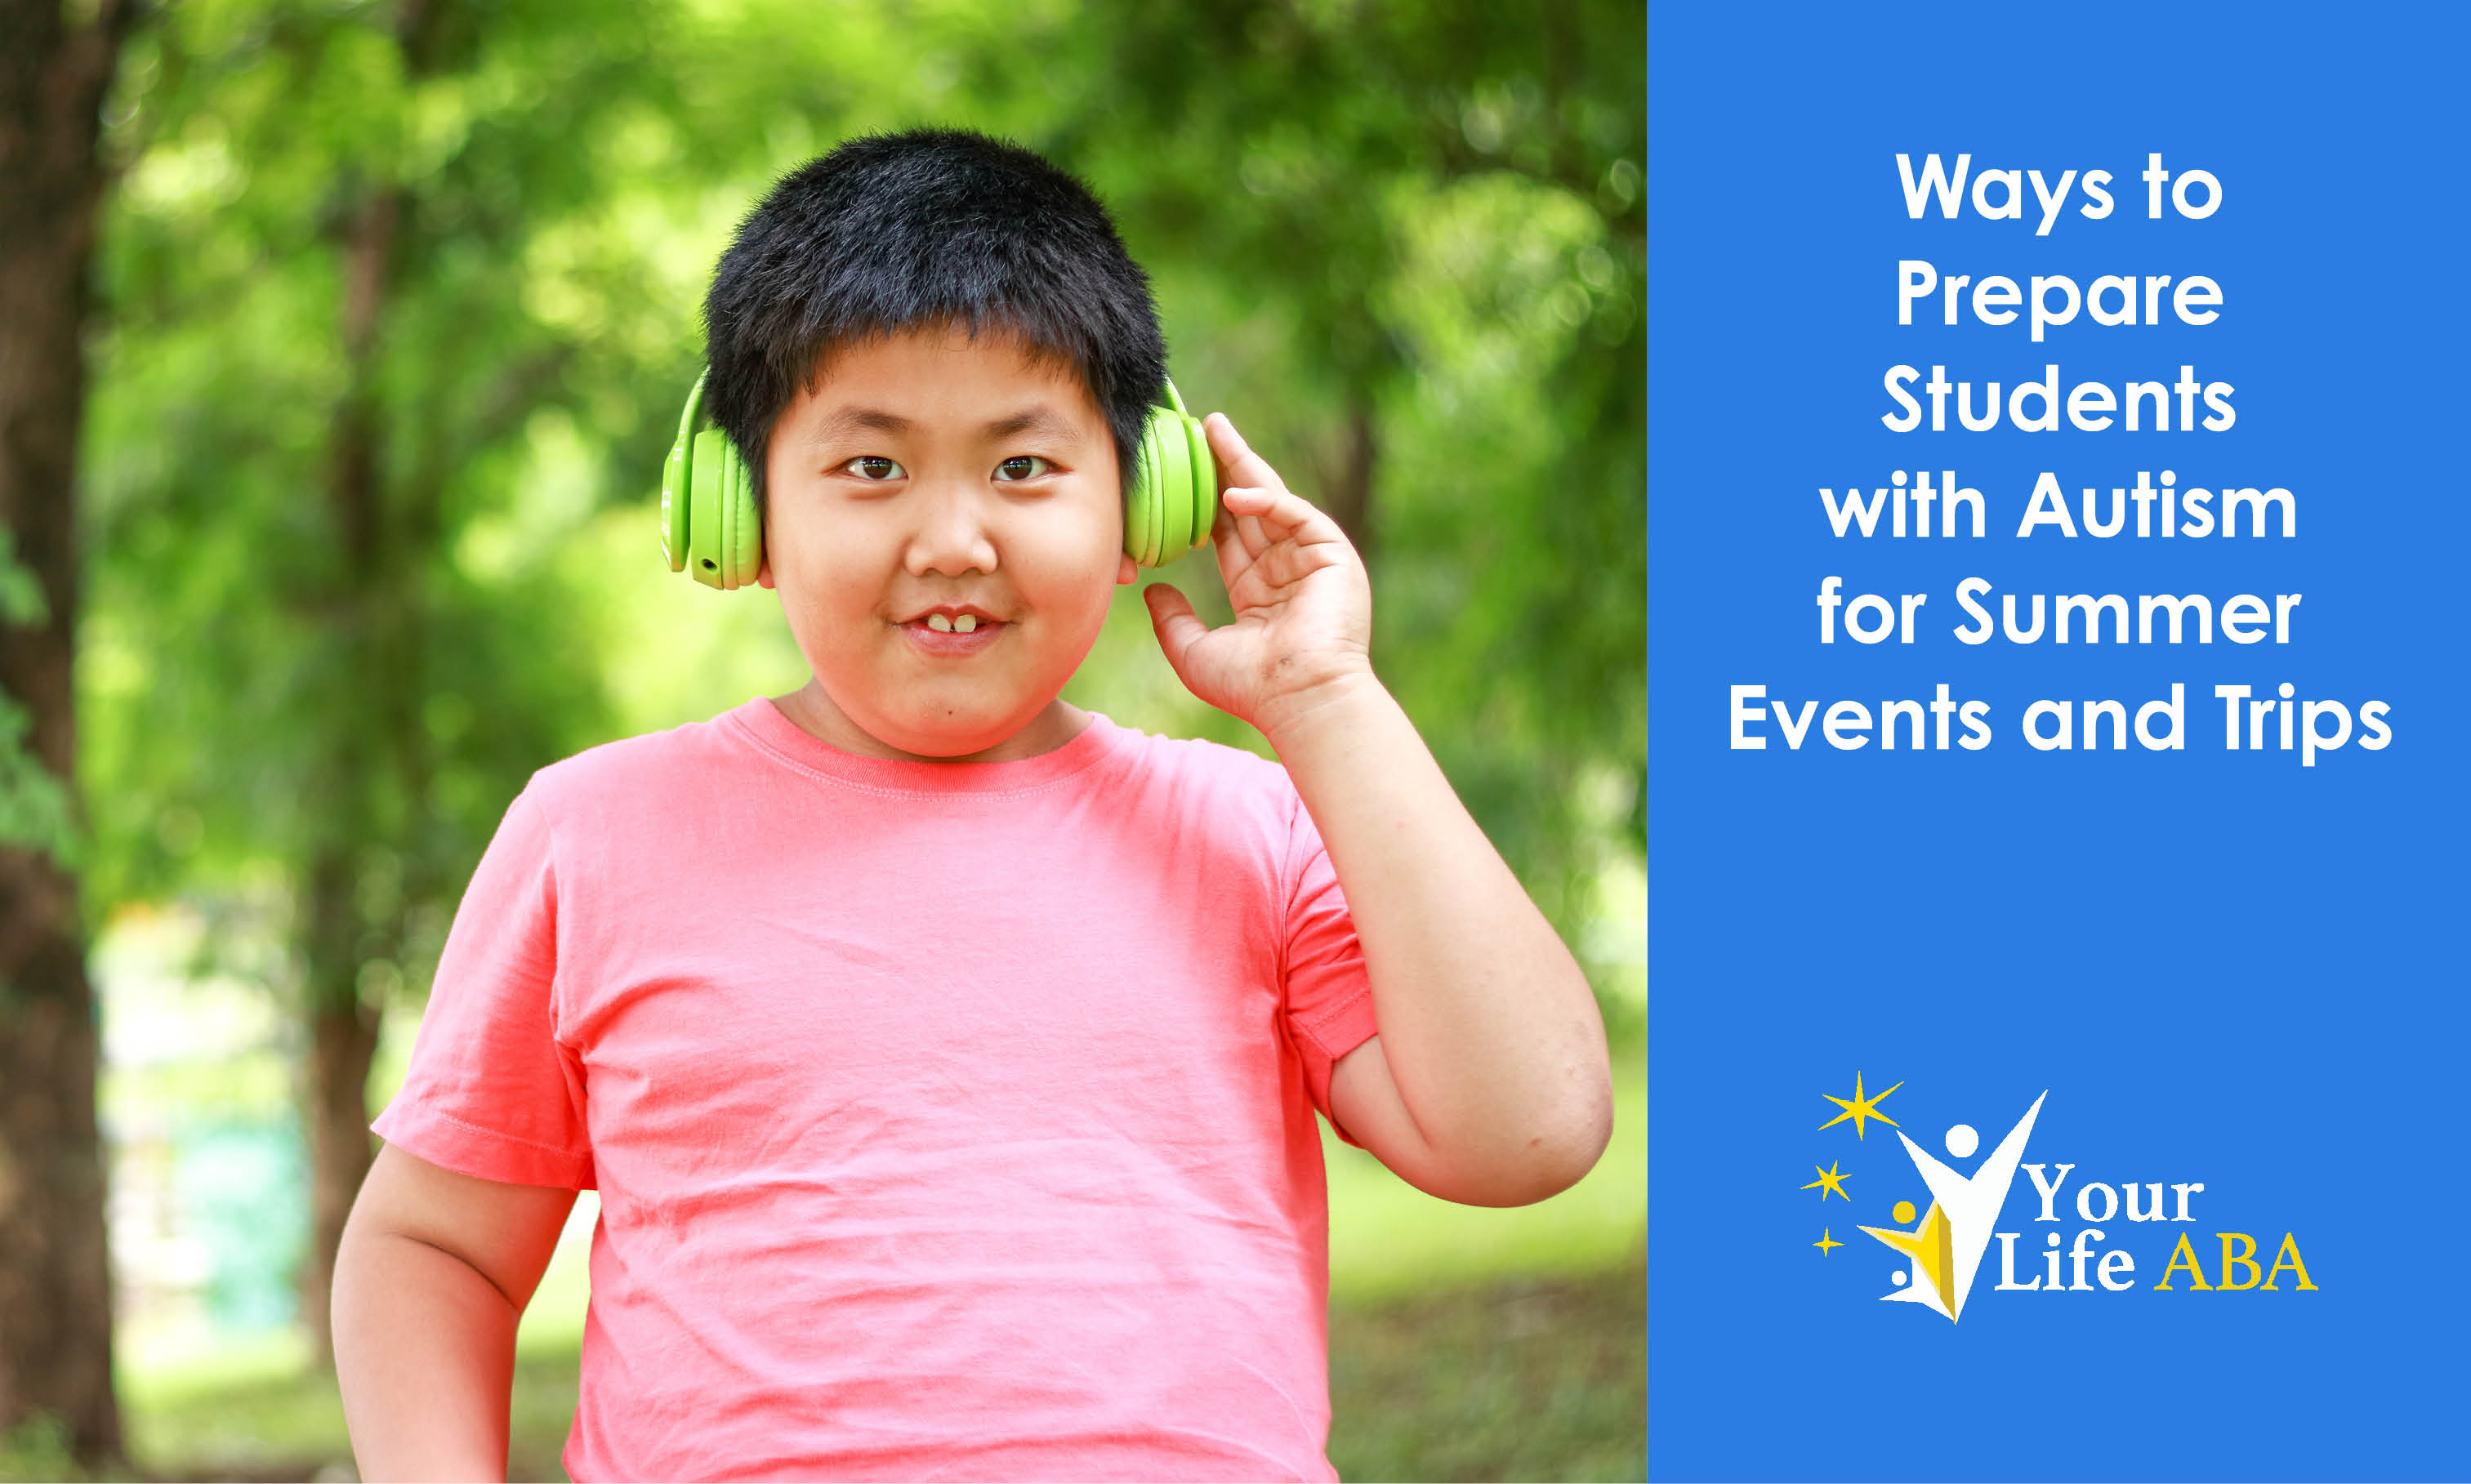 Ways to Prepare Students with Autism for Summer Events and Trips 